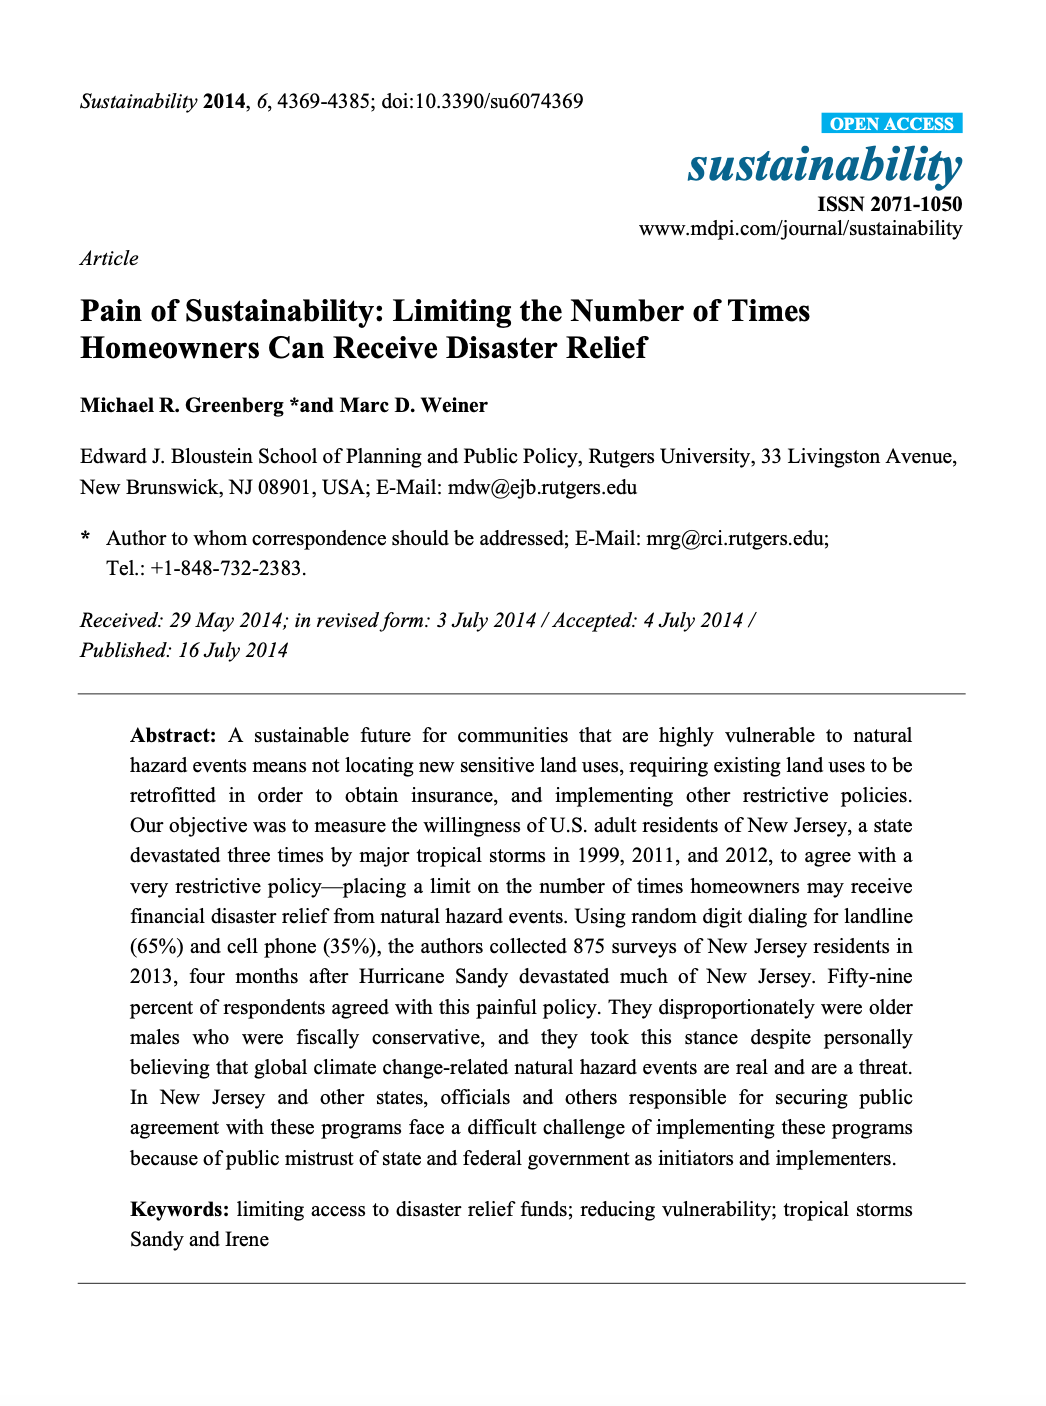 Pain of Sustainability Limiting the Number of Times Homeowners can Receive DisasterRelief